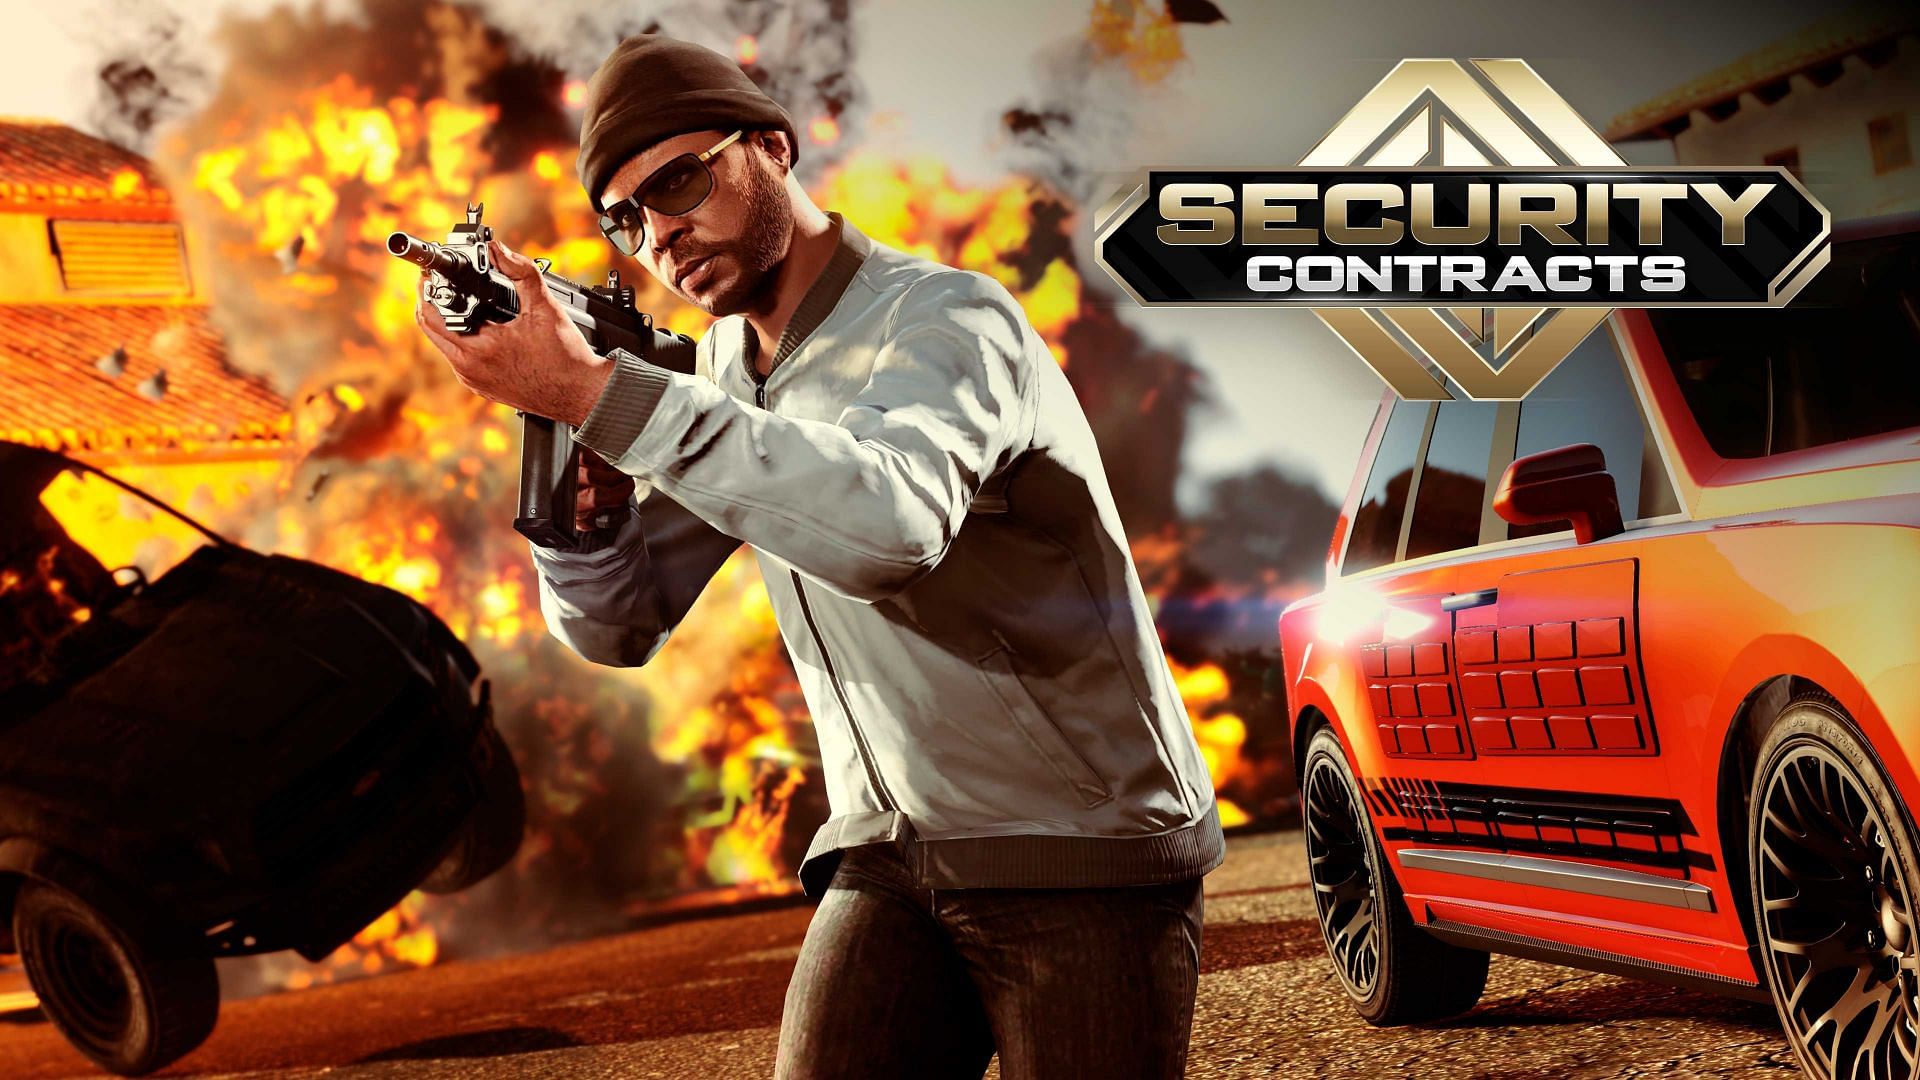 A promotional image featuring Security Contracts (Image via Rockstar Games)